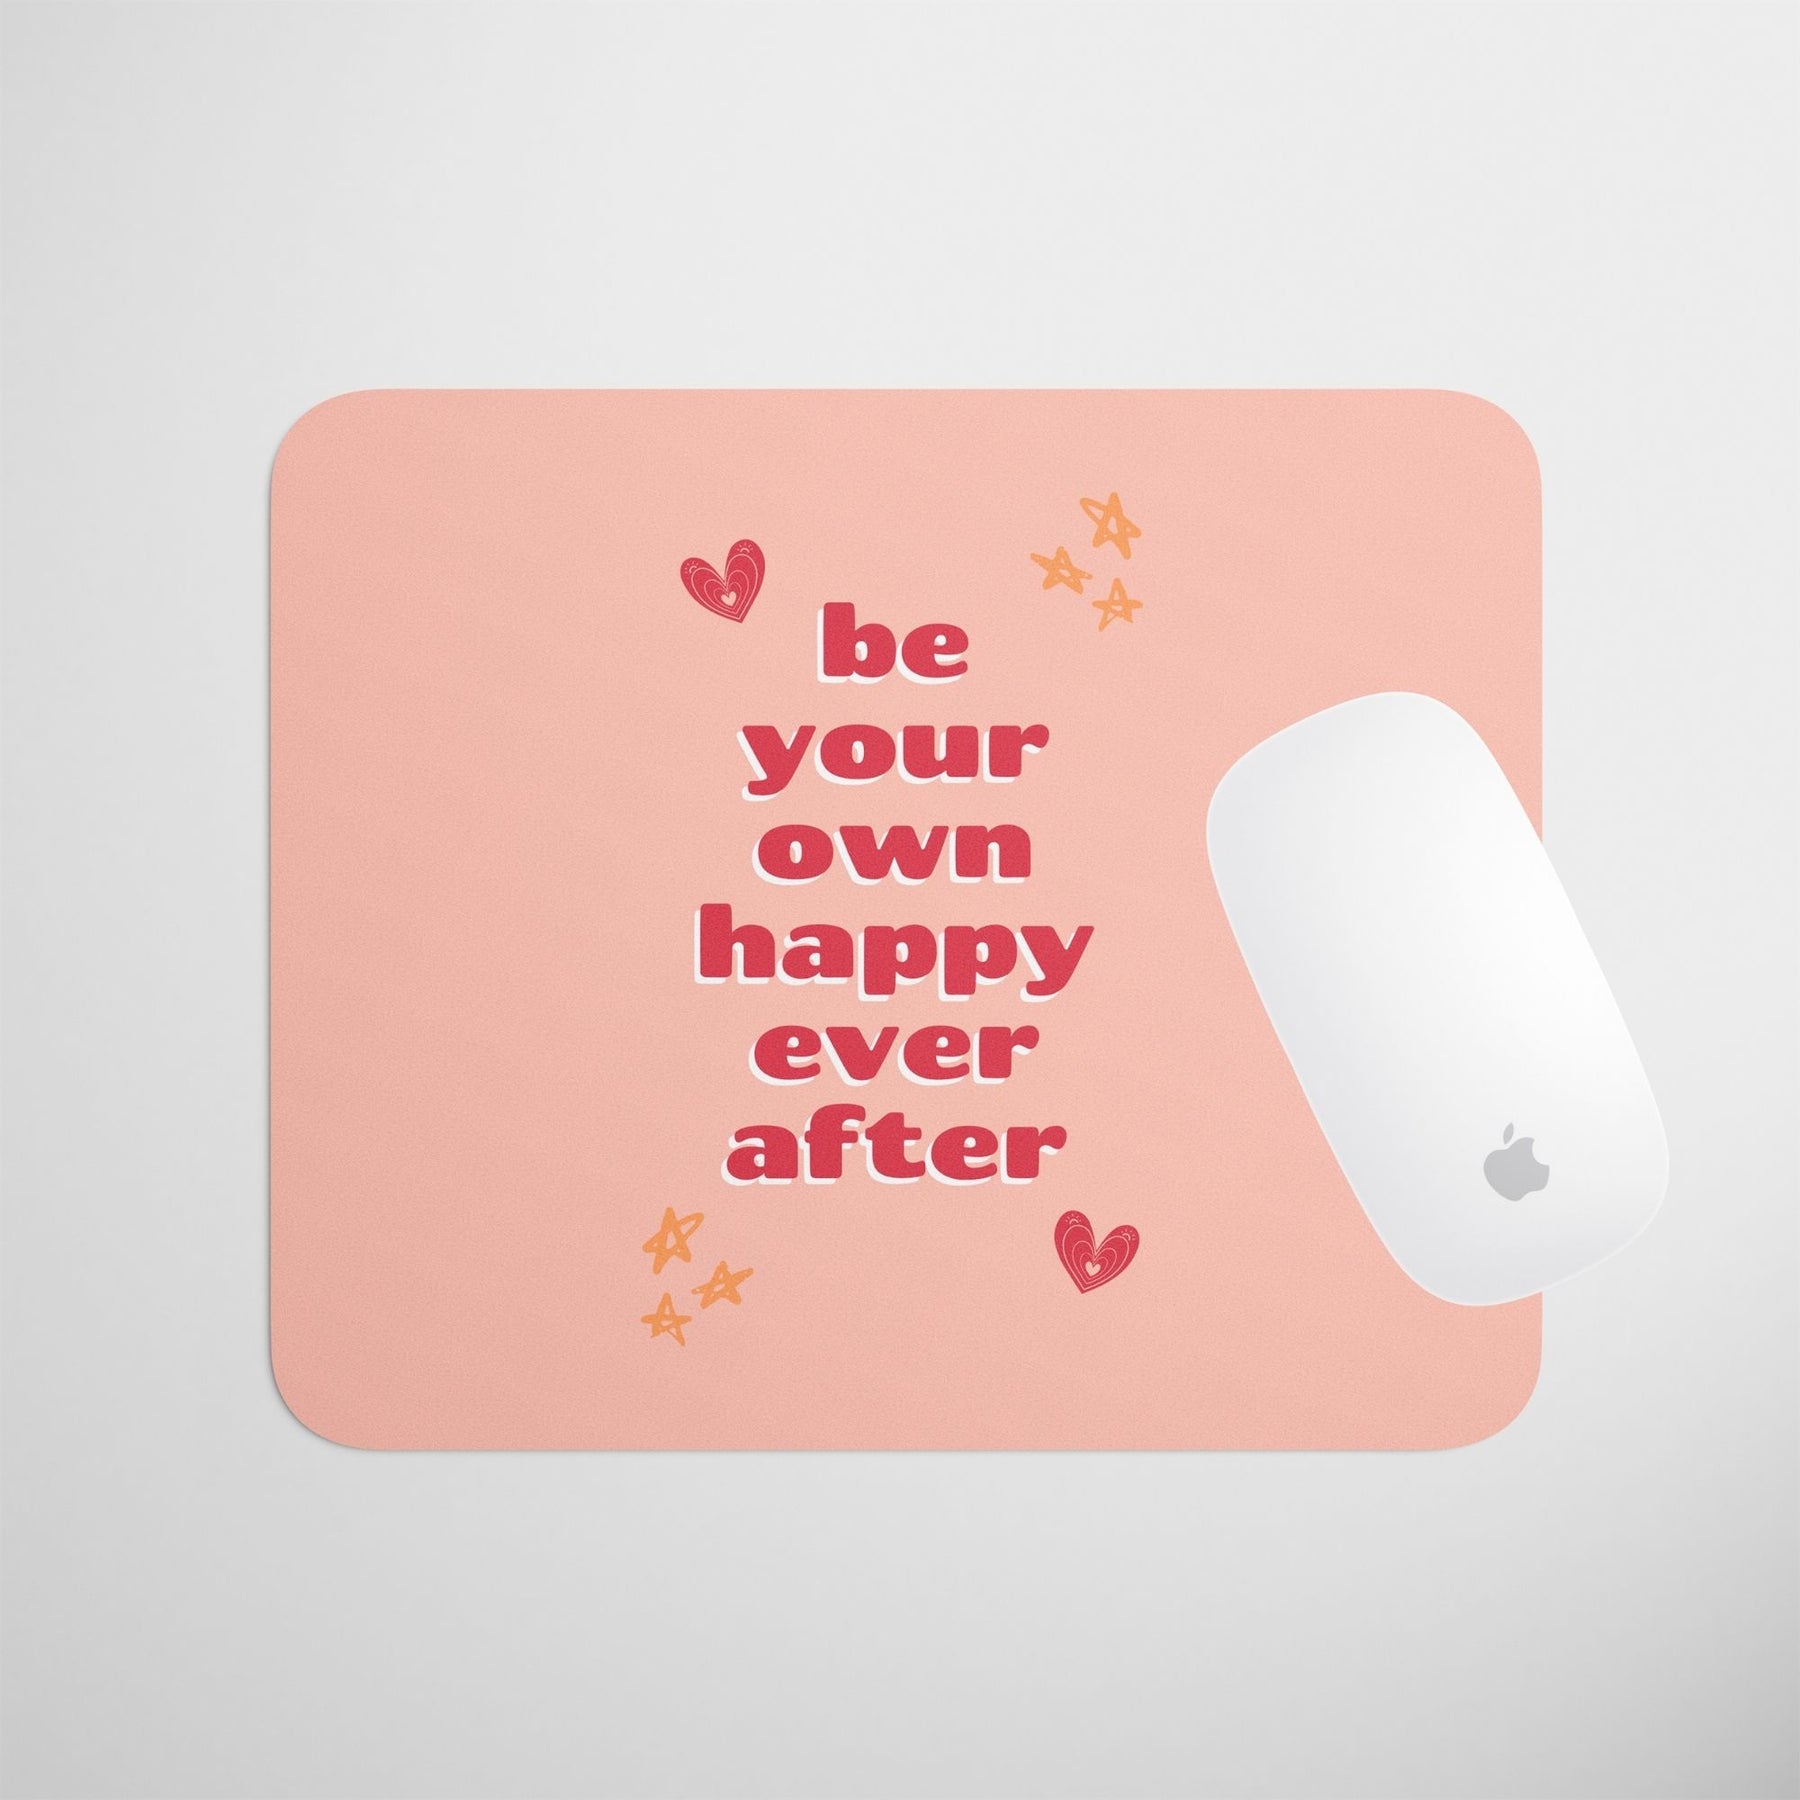 own-happy-ever-after-mouse-pad-gogirgit-com-2